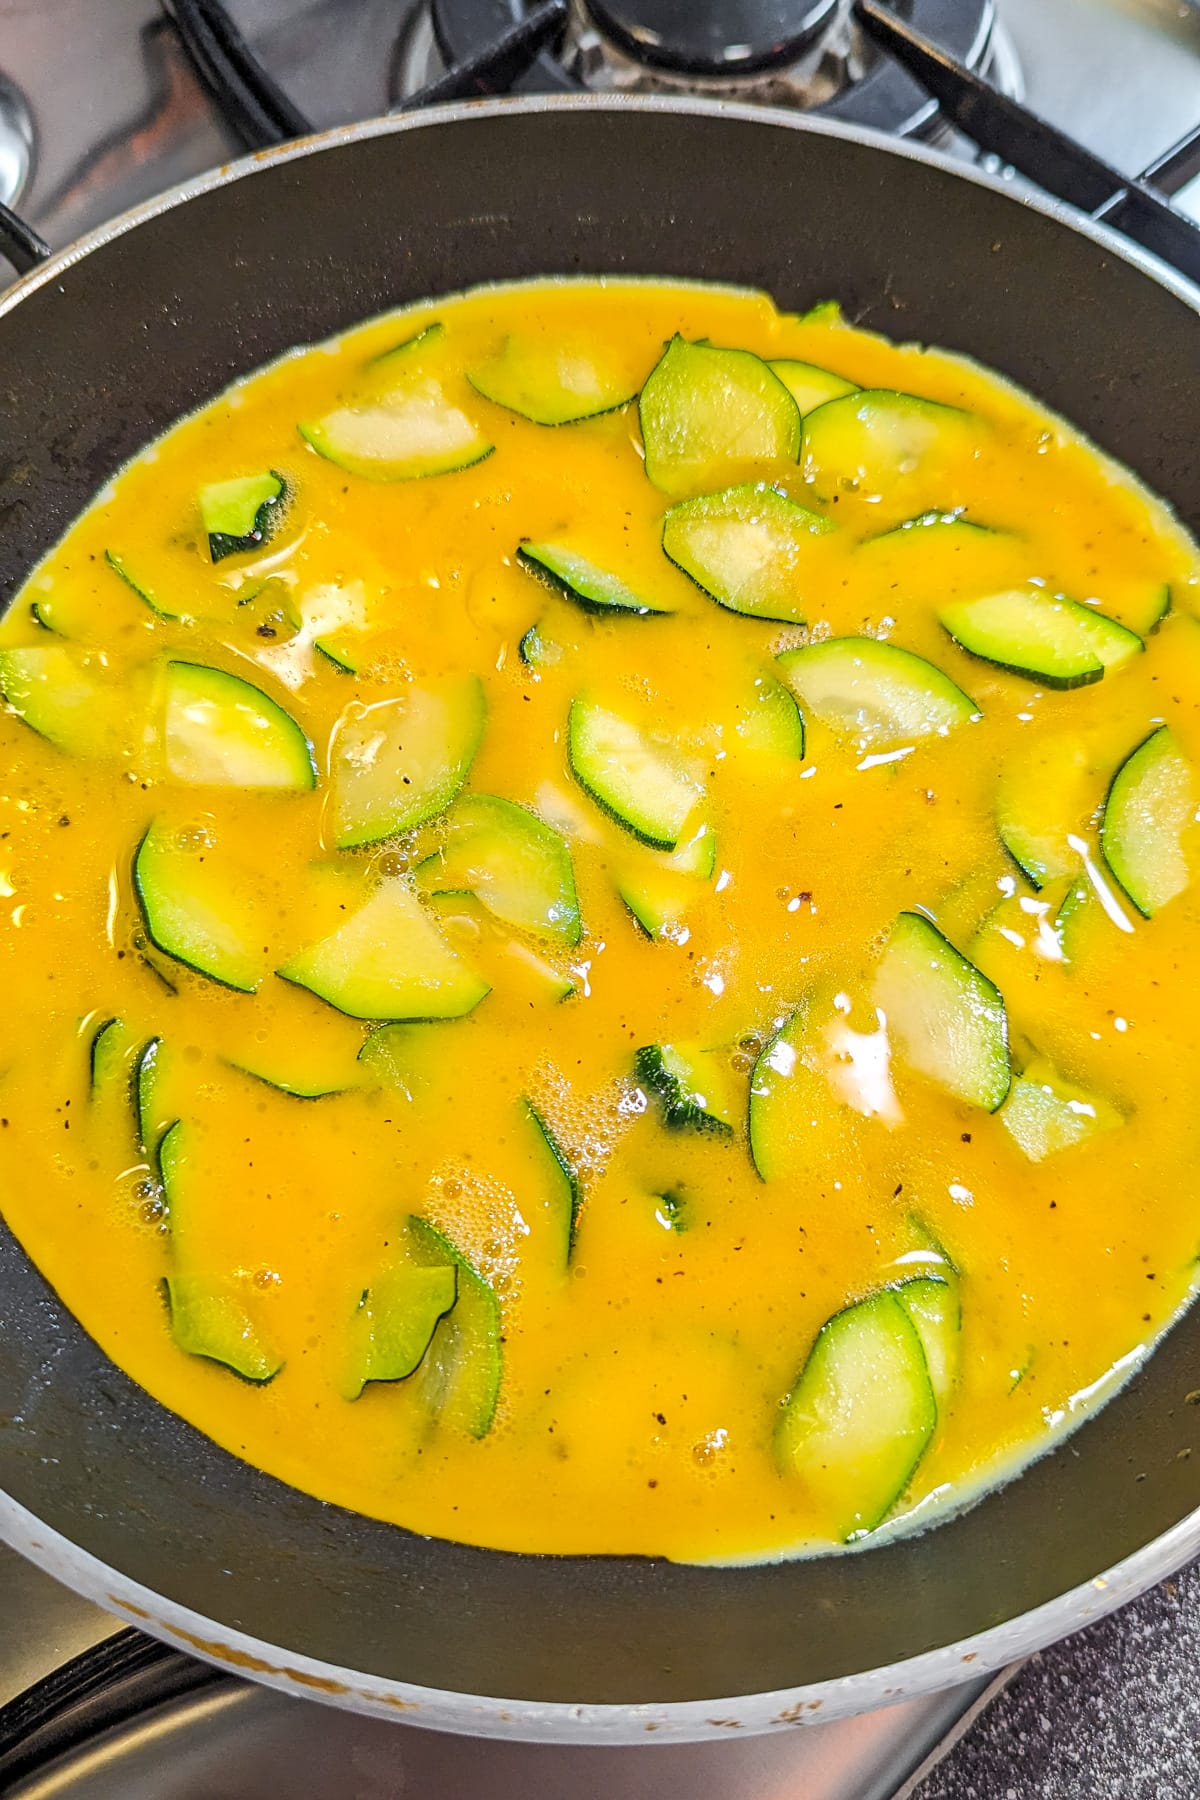 Sliced zucchini covered with beaten eggs in a frying pan on the stove.